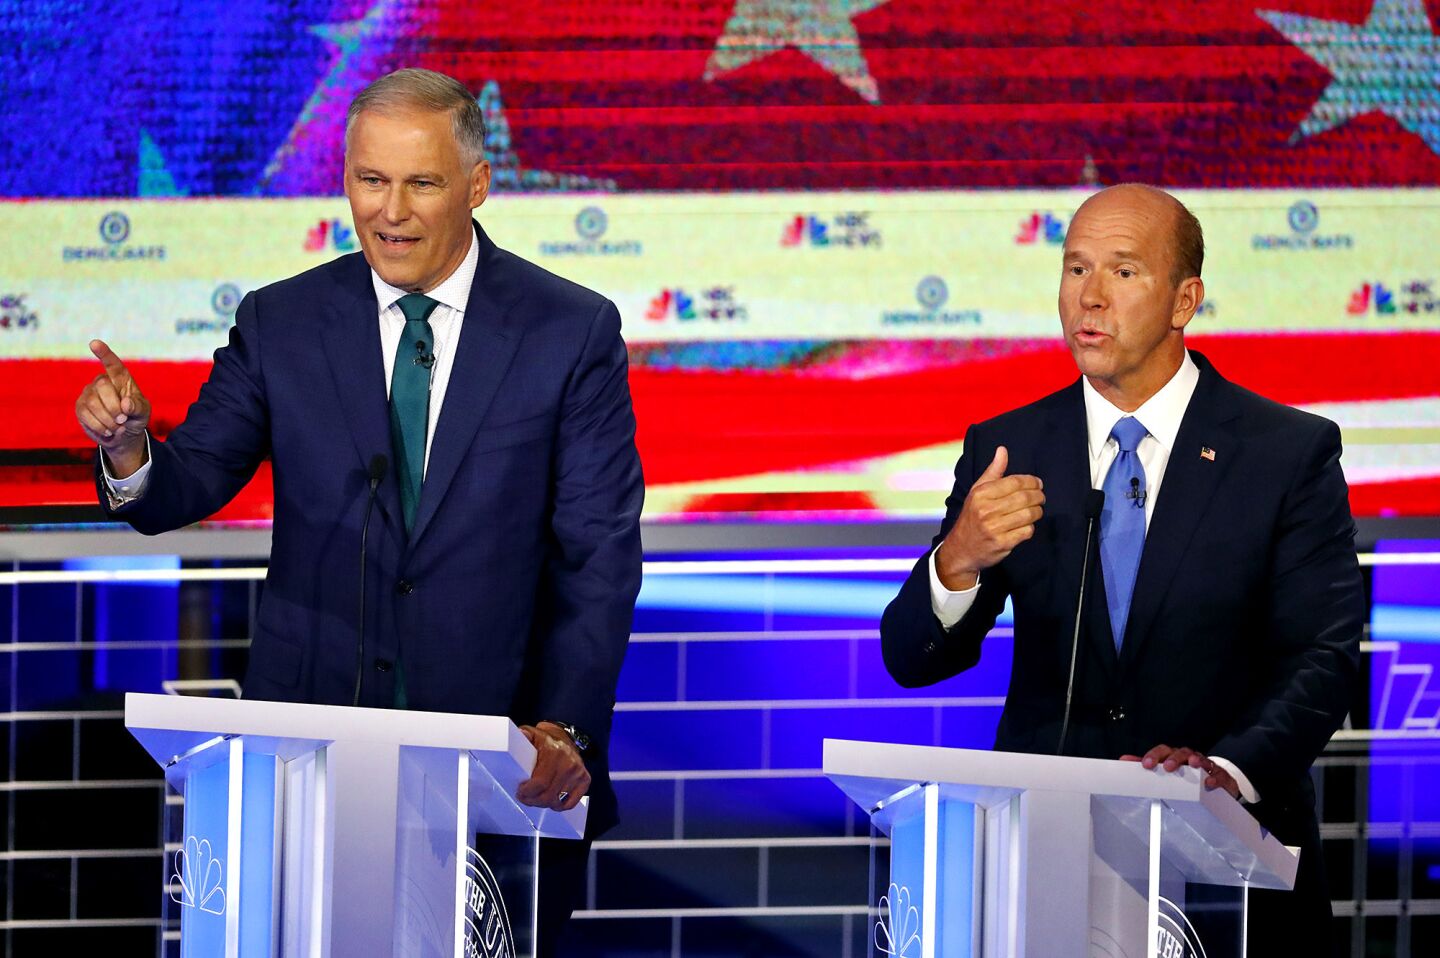 Democratic presidential candidates Washington Gov. Jay Inslee , left and former Maryland Rep. John Delaney answer a question at the same time during a Democratic primary debate hosted by NBC News at the Adrienne Arsht Center for the Performing Arts, Wednesday, June 26, 2019, in Miami.